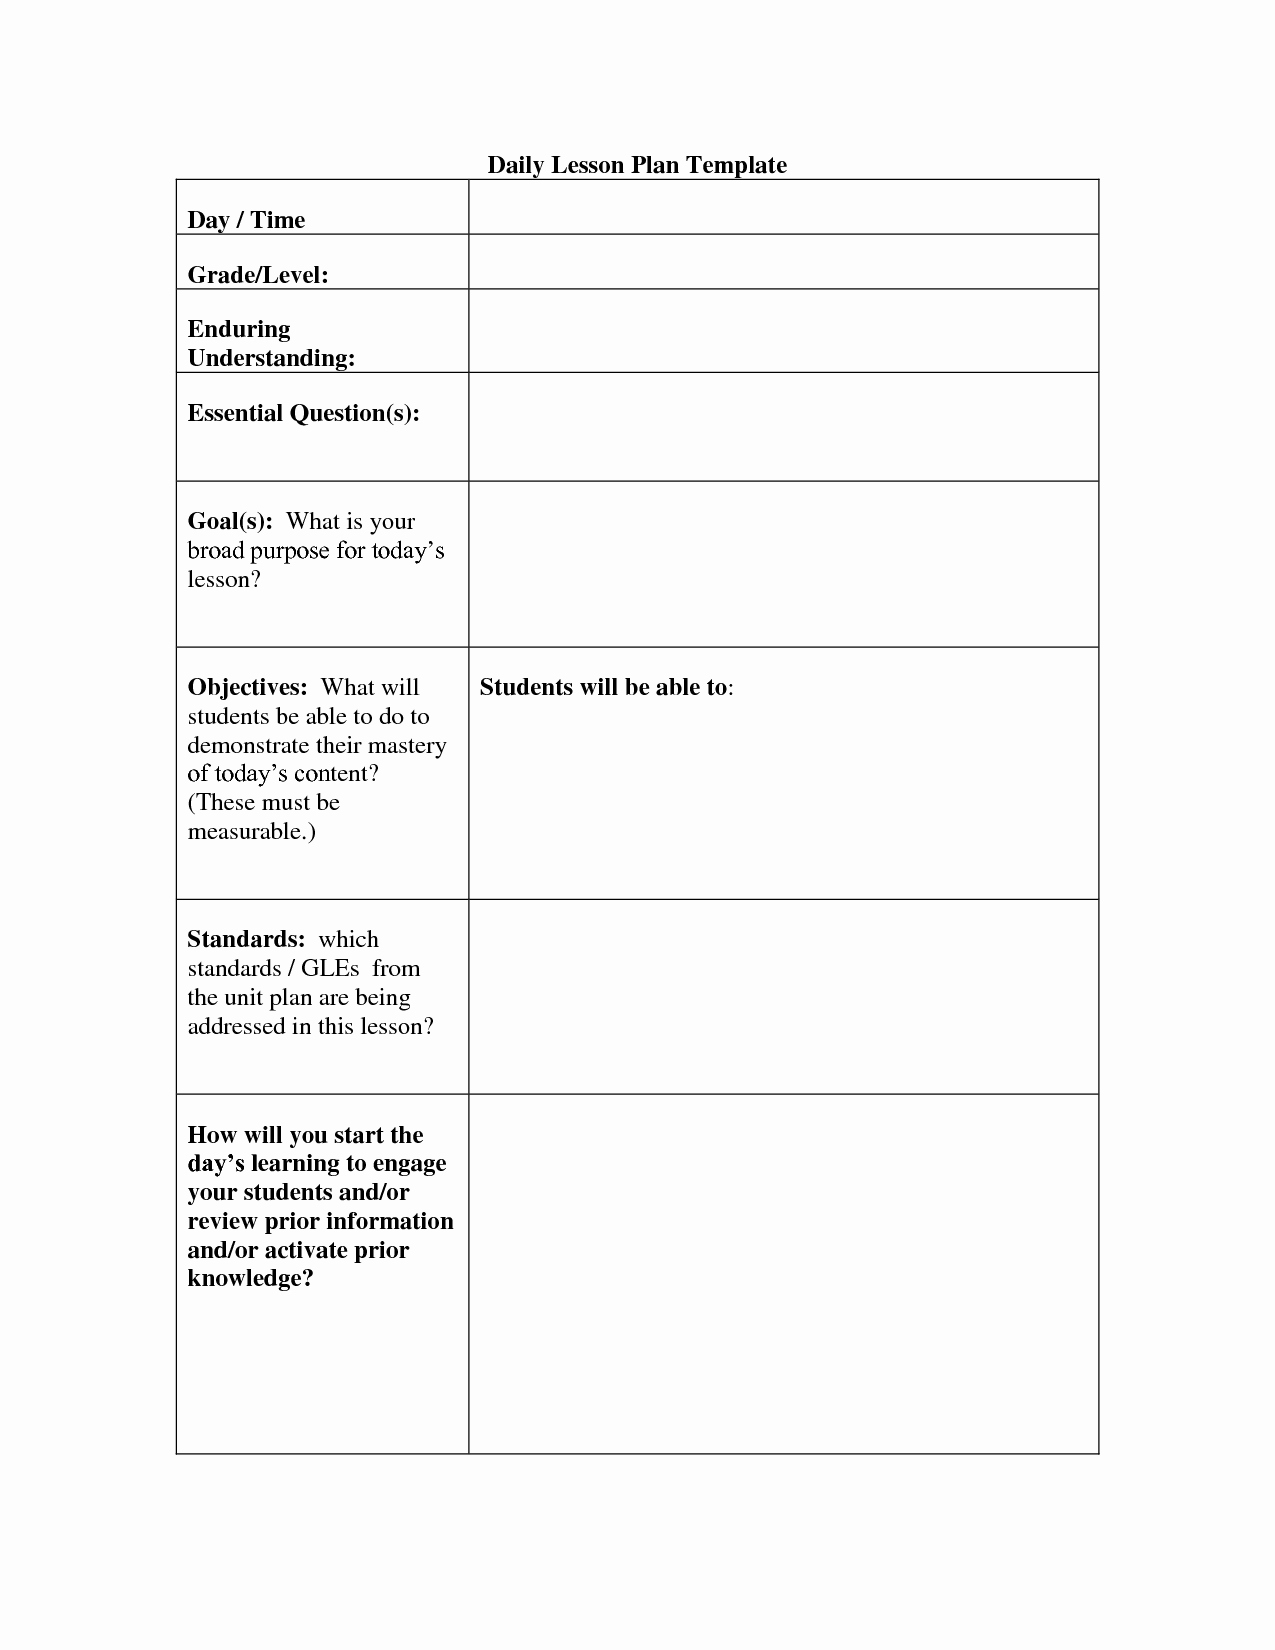 Lesson Plan Template Doc Luxury Daily Lesson Plan Template Get as Doc by Neolledivine